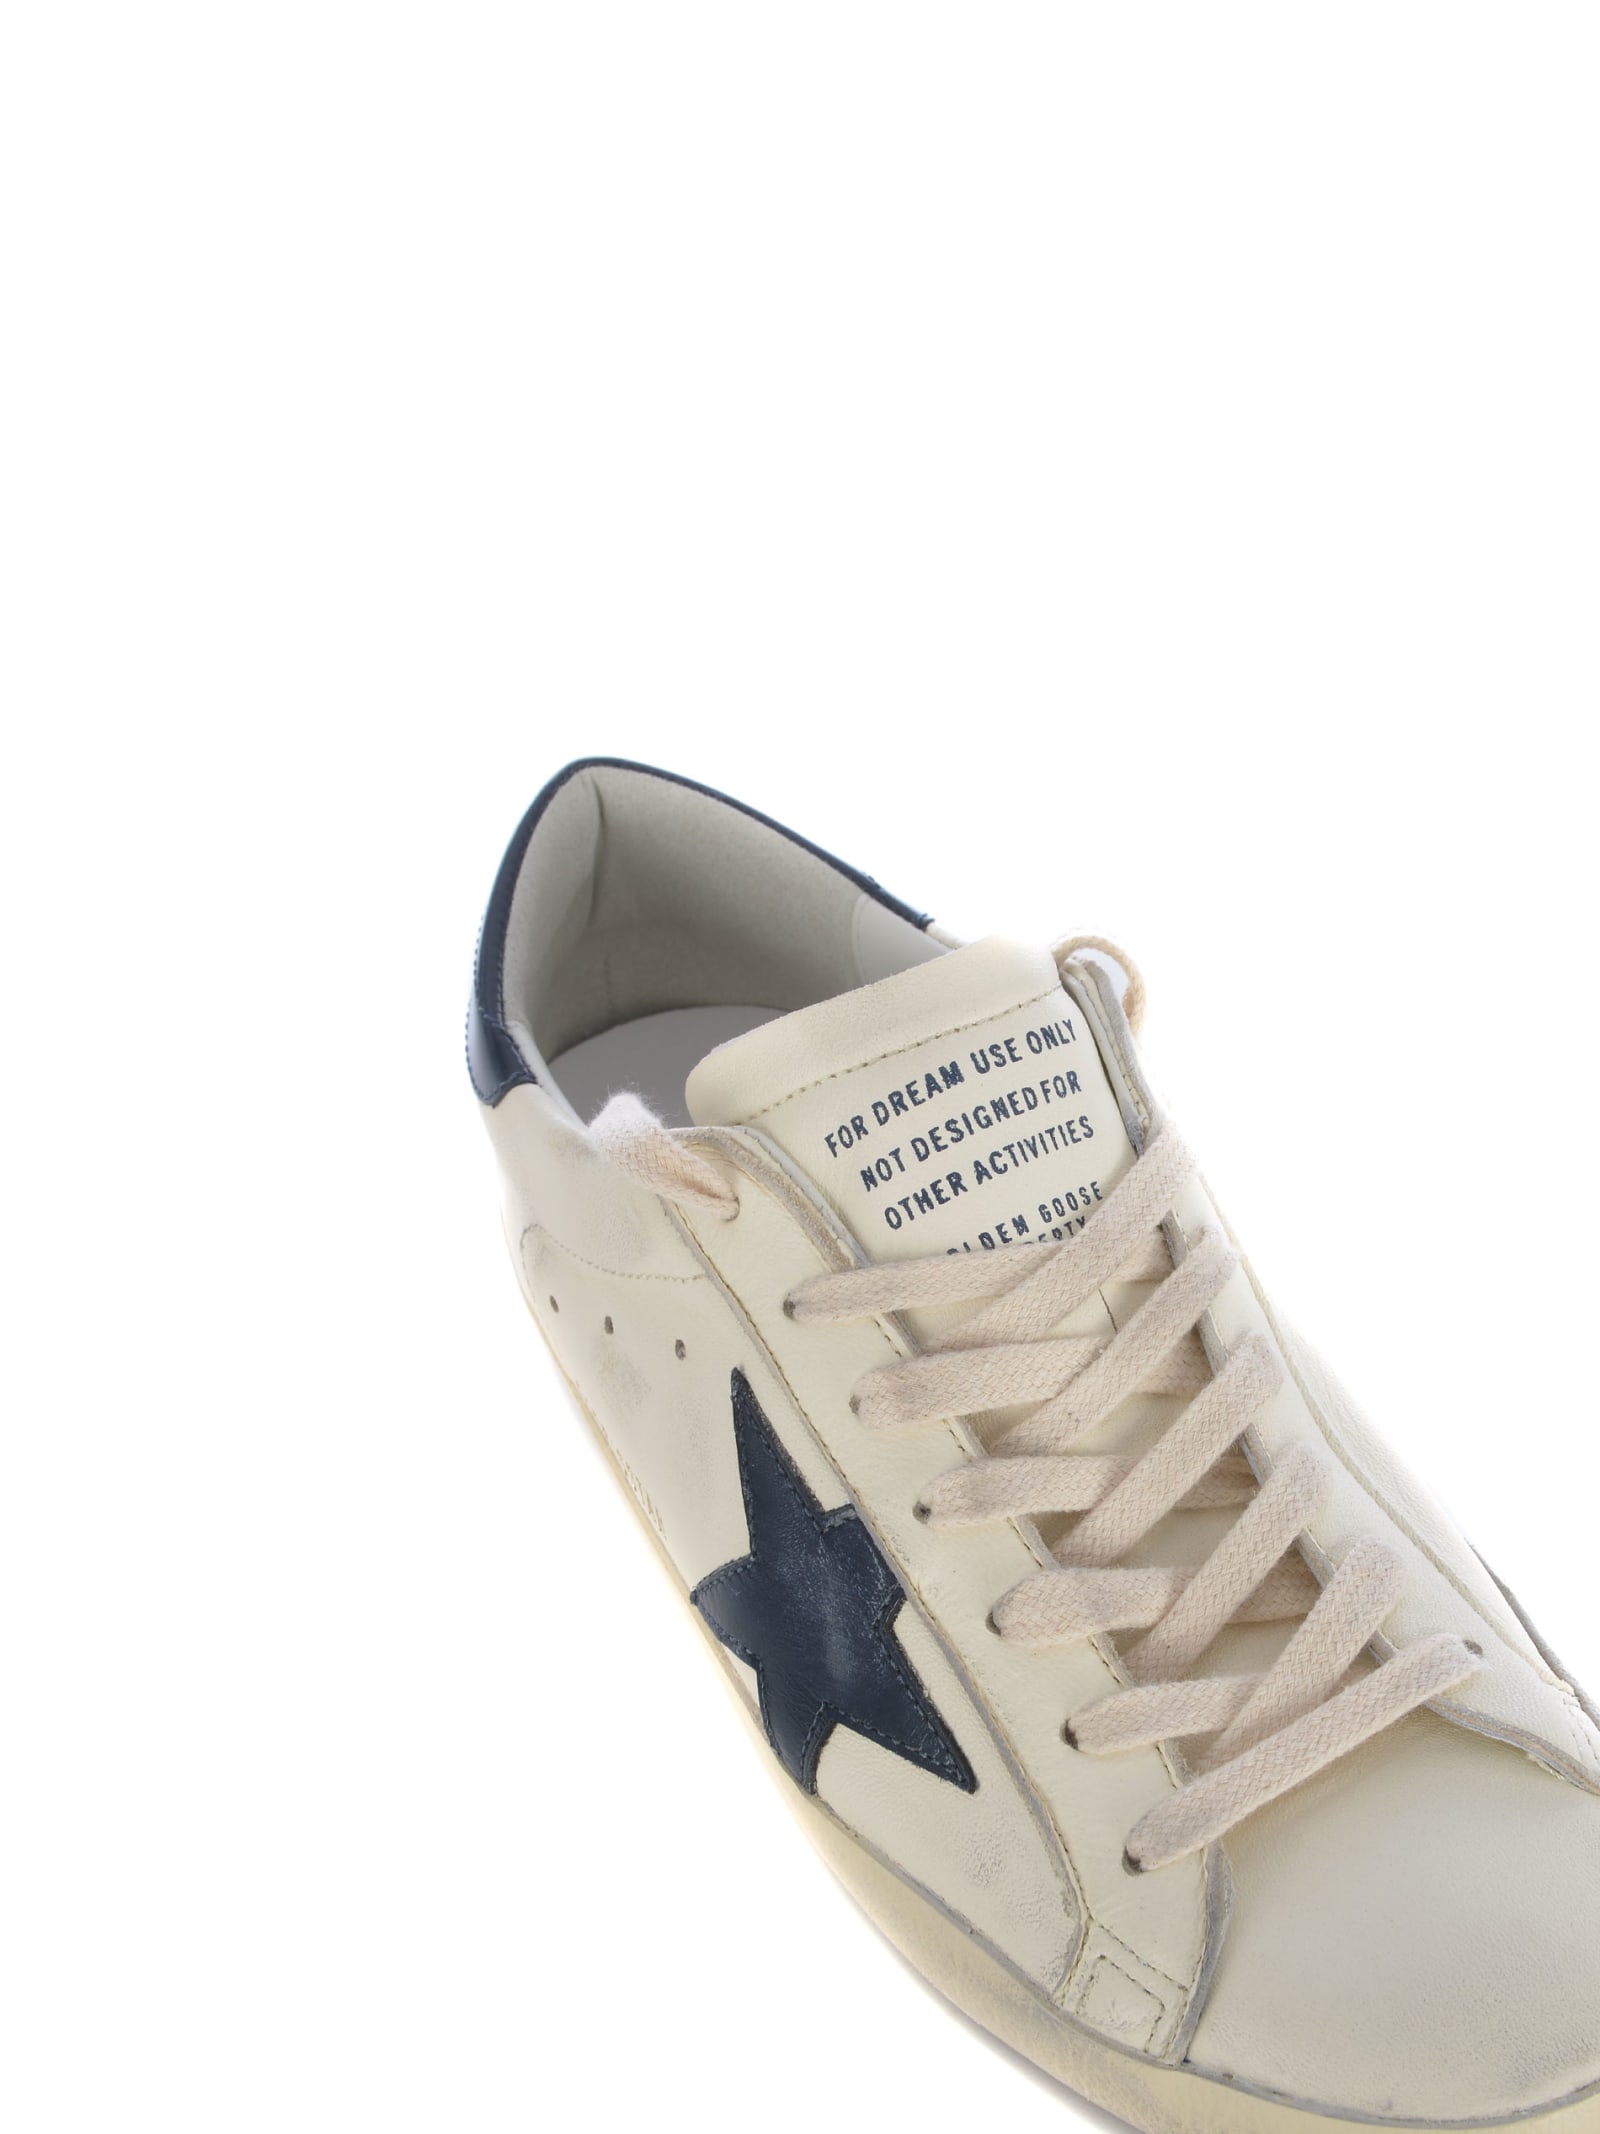 Shop Golden Goose Sneakers Golden Gooose Super Star Made Of Leather In Bianco Blu